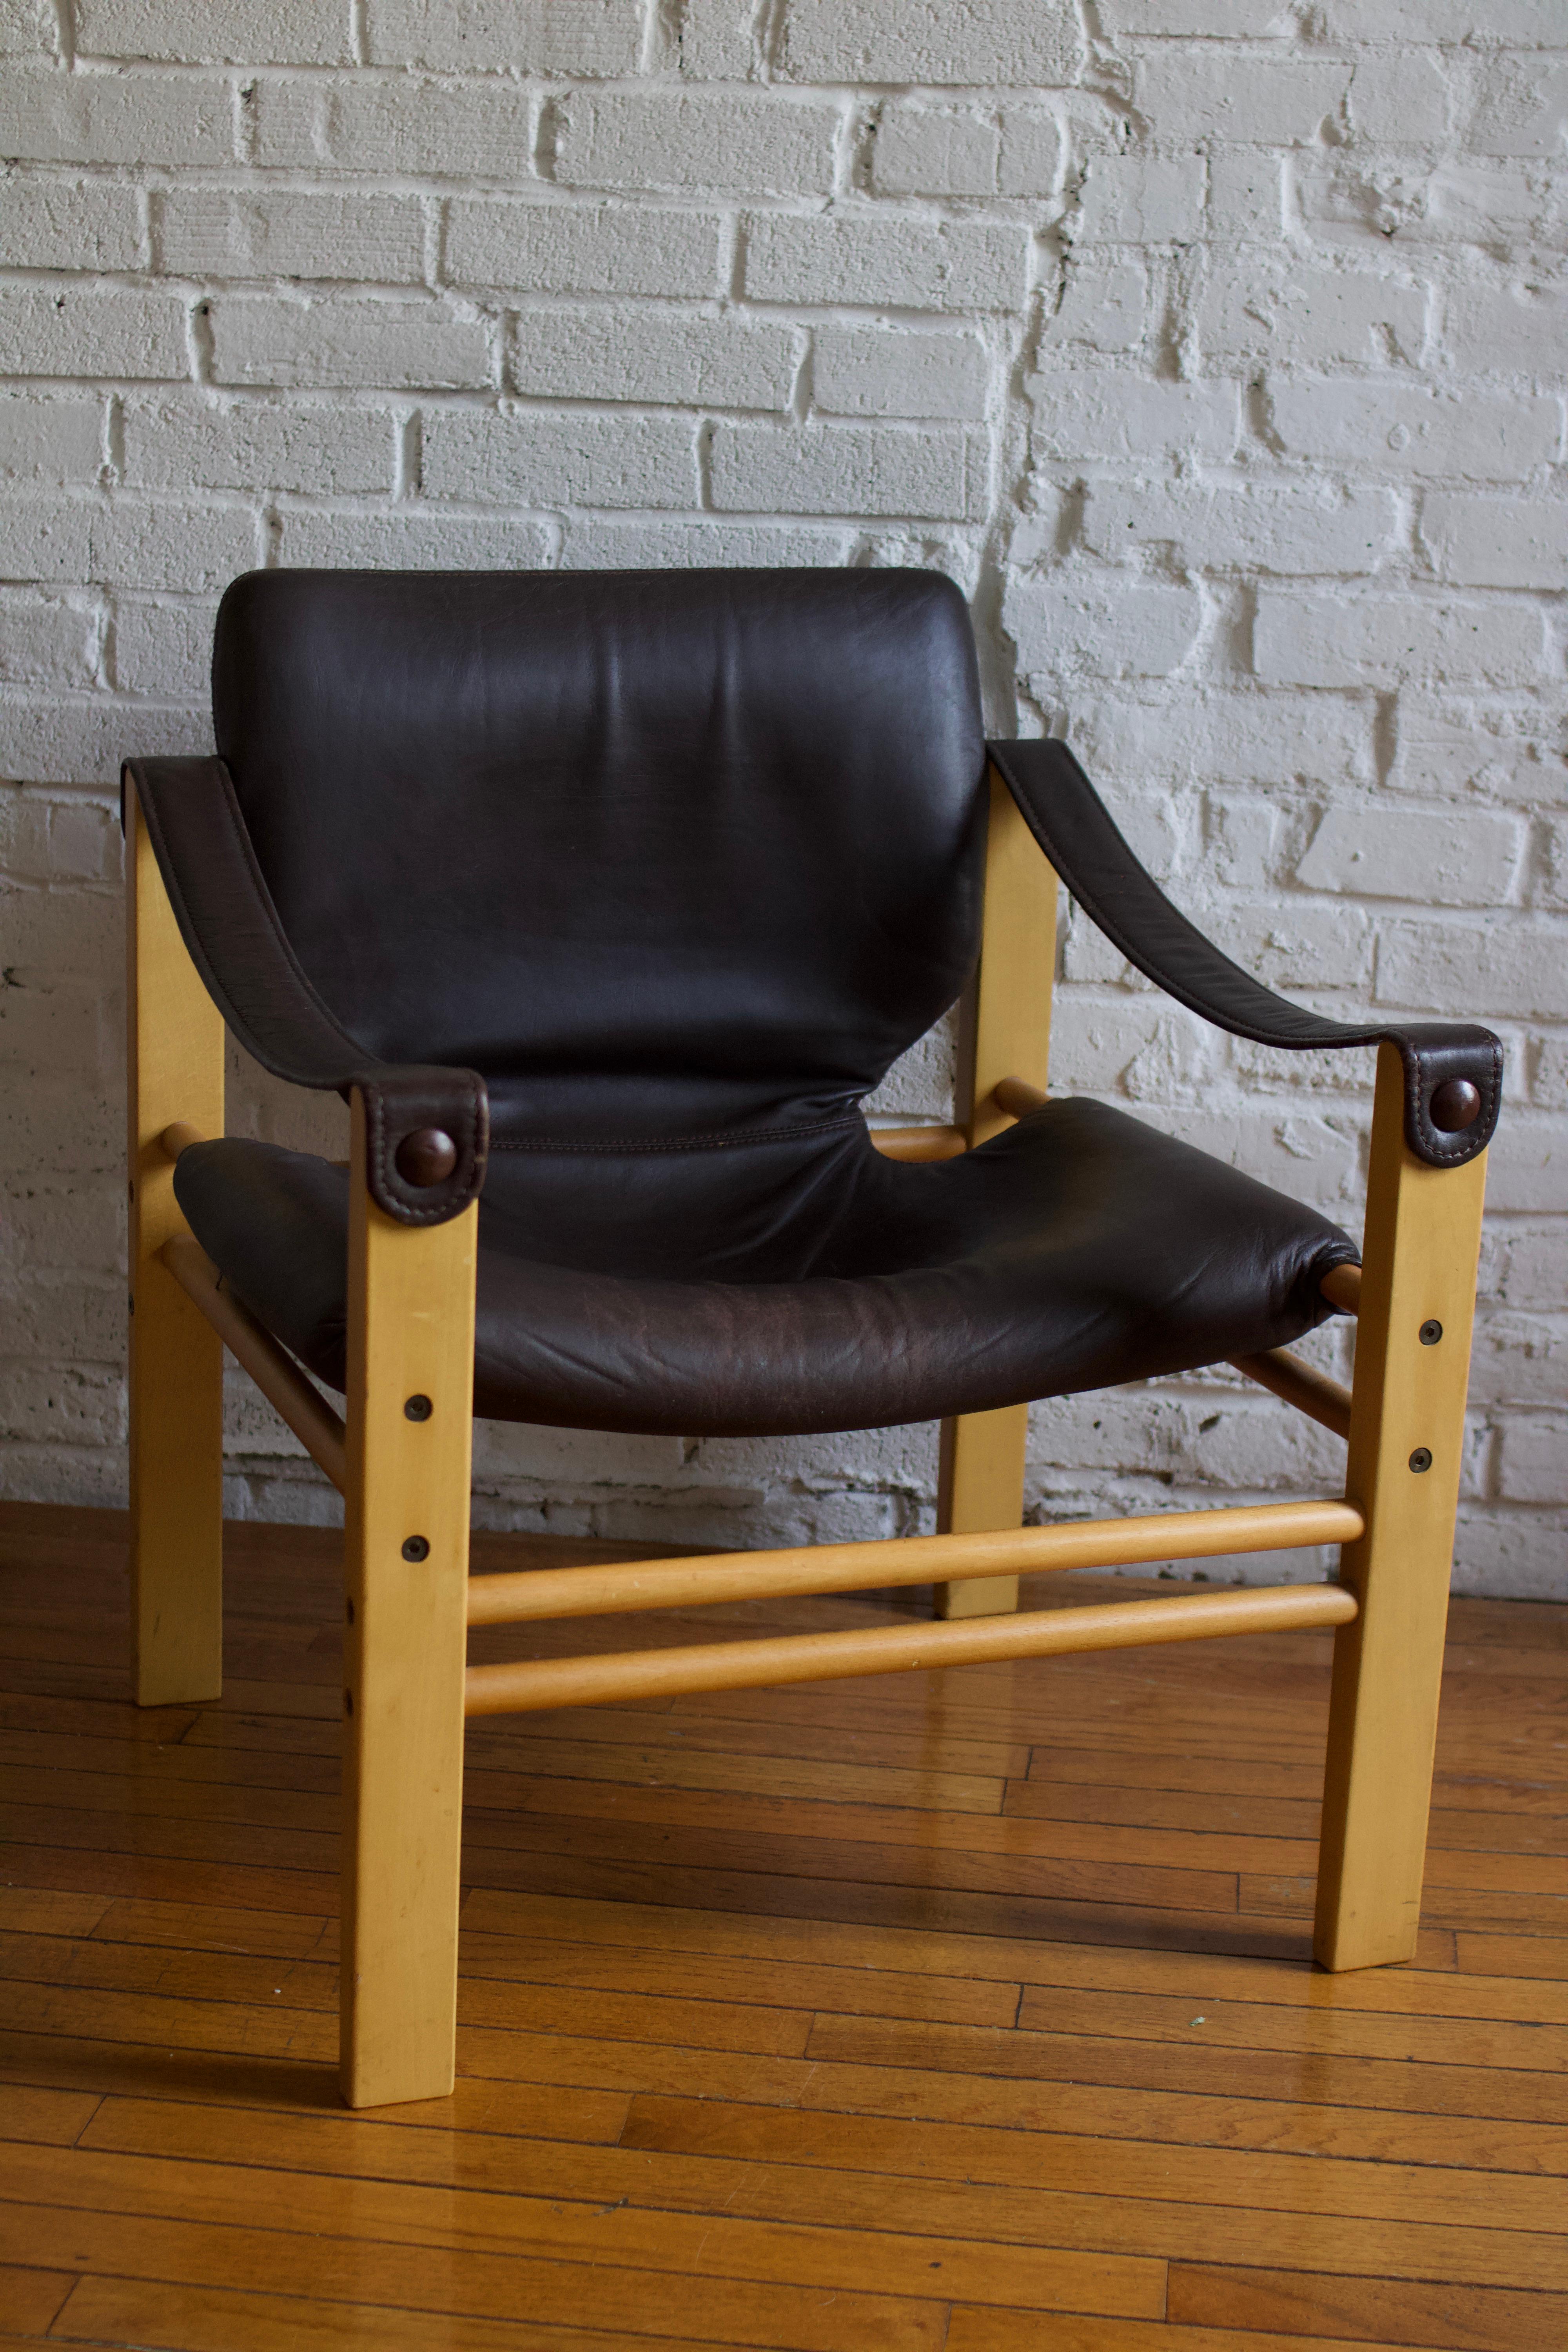 Special mid-century modern safari lounge chair made in Europe, circa the 1960s. The piece features its original cognac faux leather, a sturdy wood frame, stylish curves, and steel screw details. The chair is also impressively comfortable. 

Ships